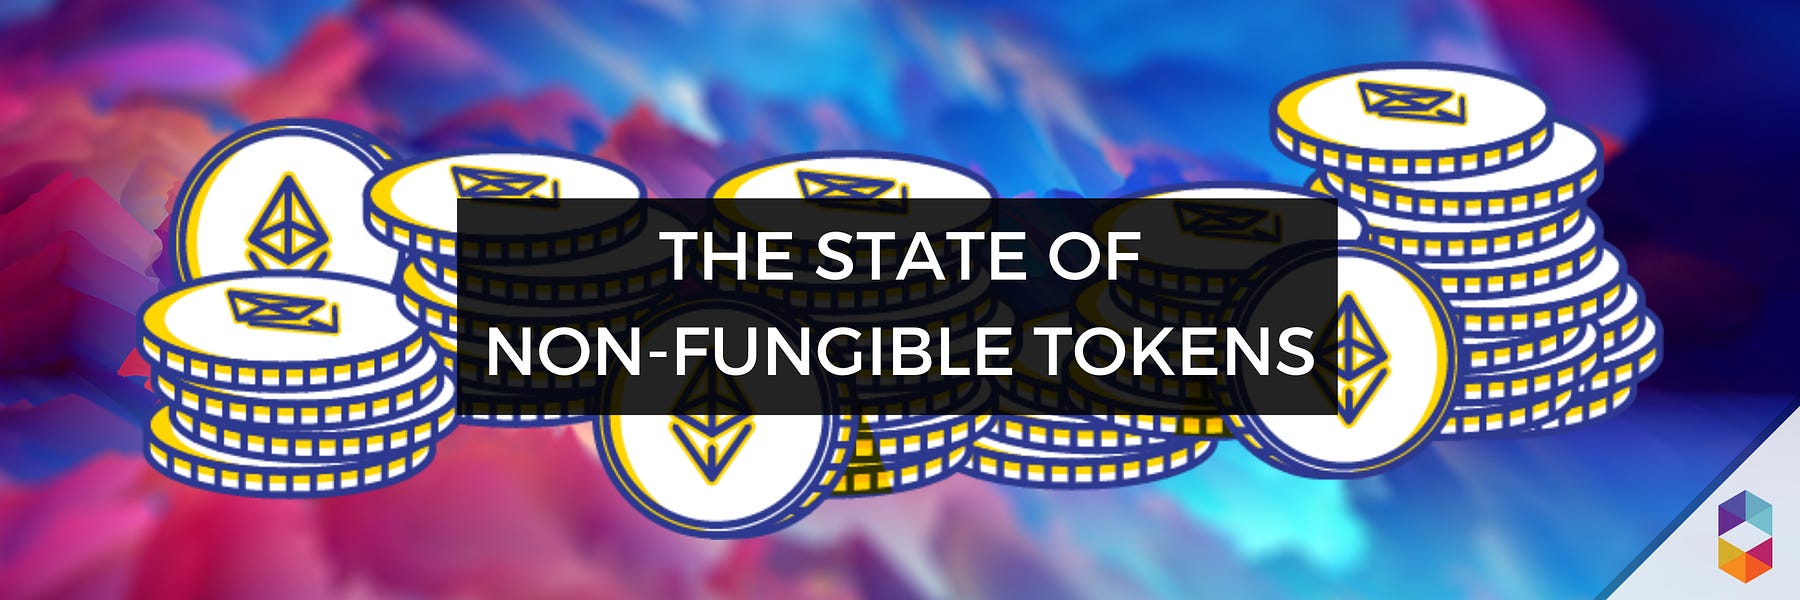 non fungible tokens examples